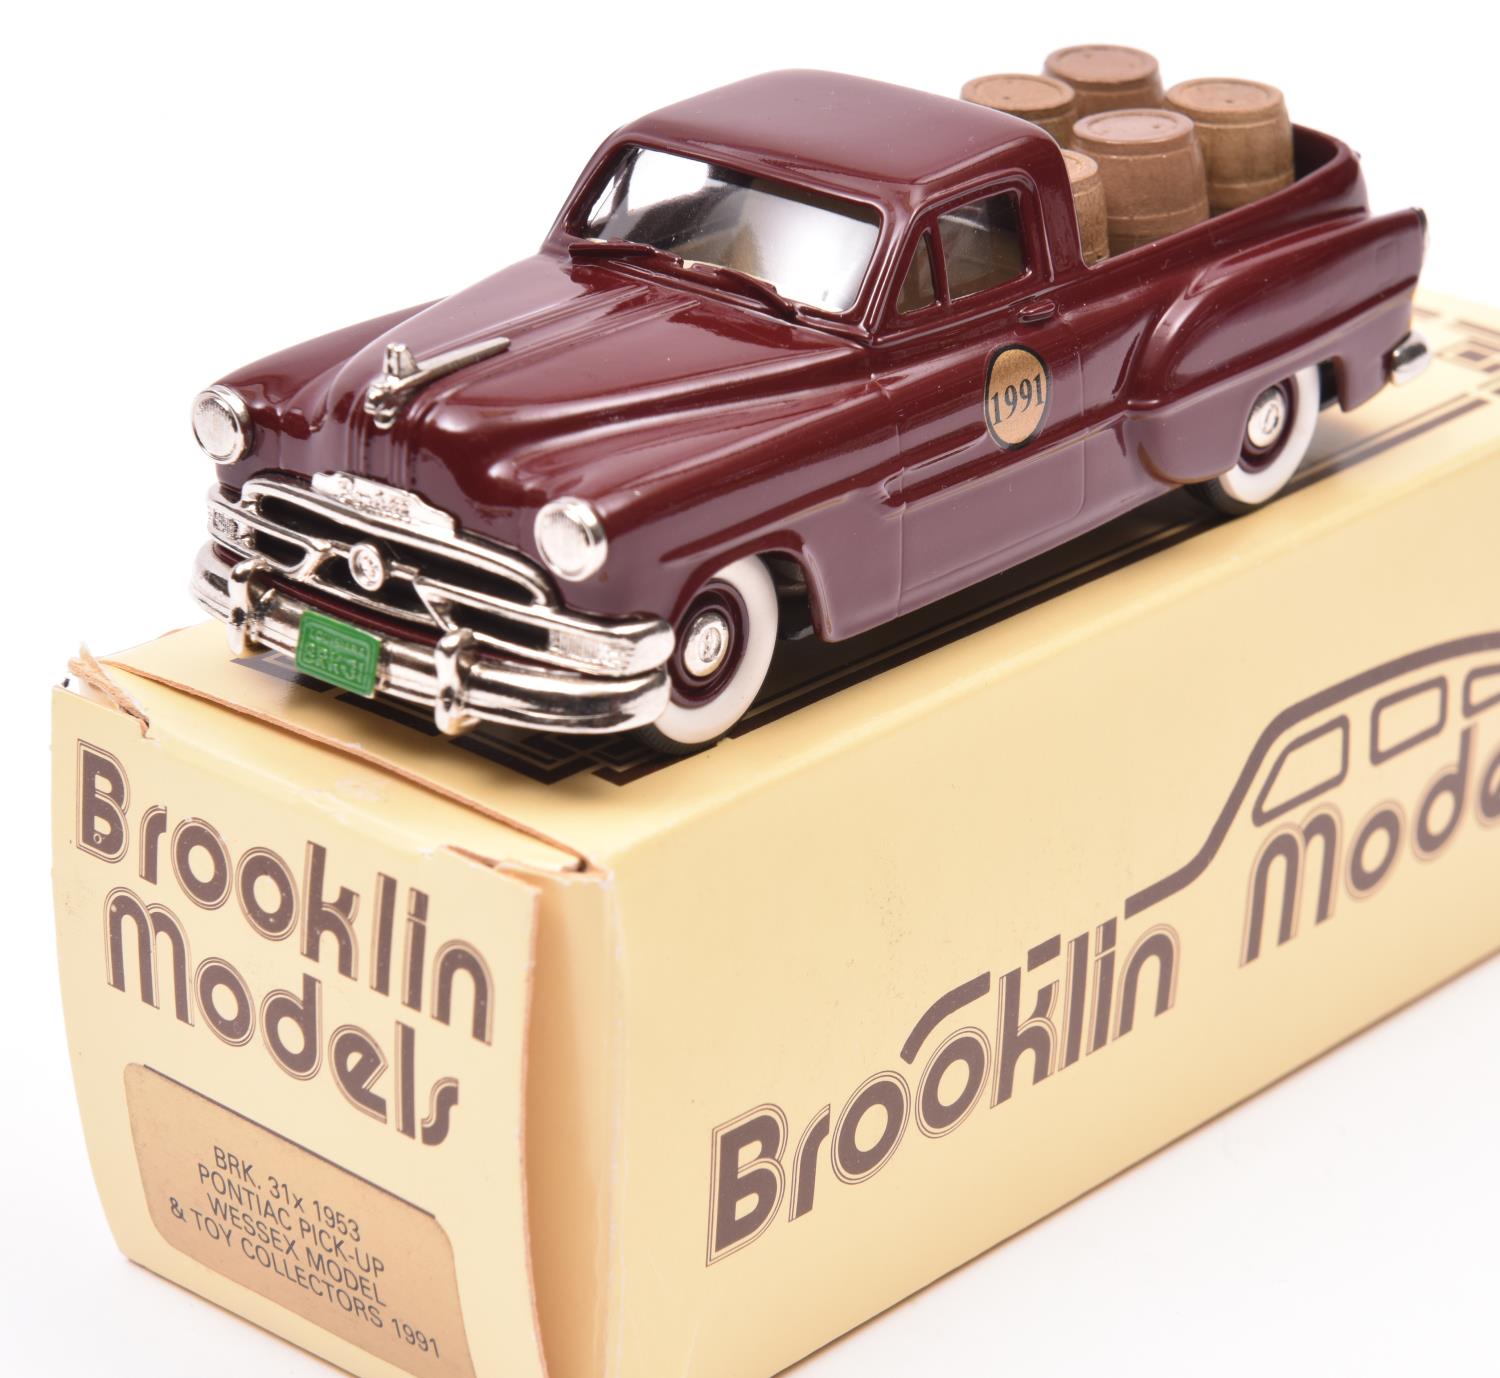 A Brooklin Models BRK. 31x 1953 Pontiac Pick-Up. Wessex Model & Toy Collectors 1991. In maroon